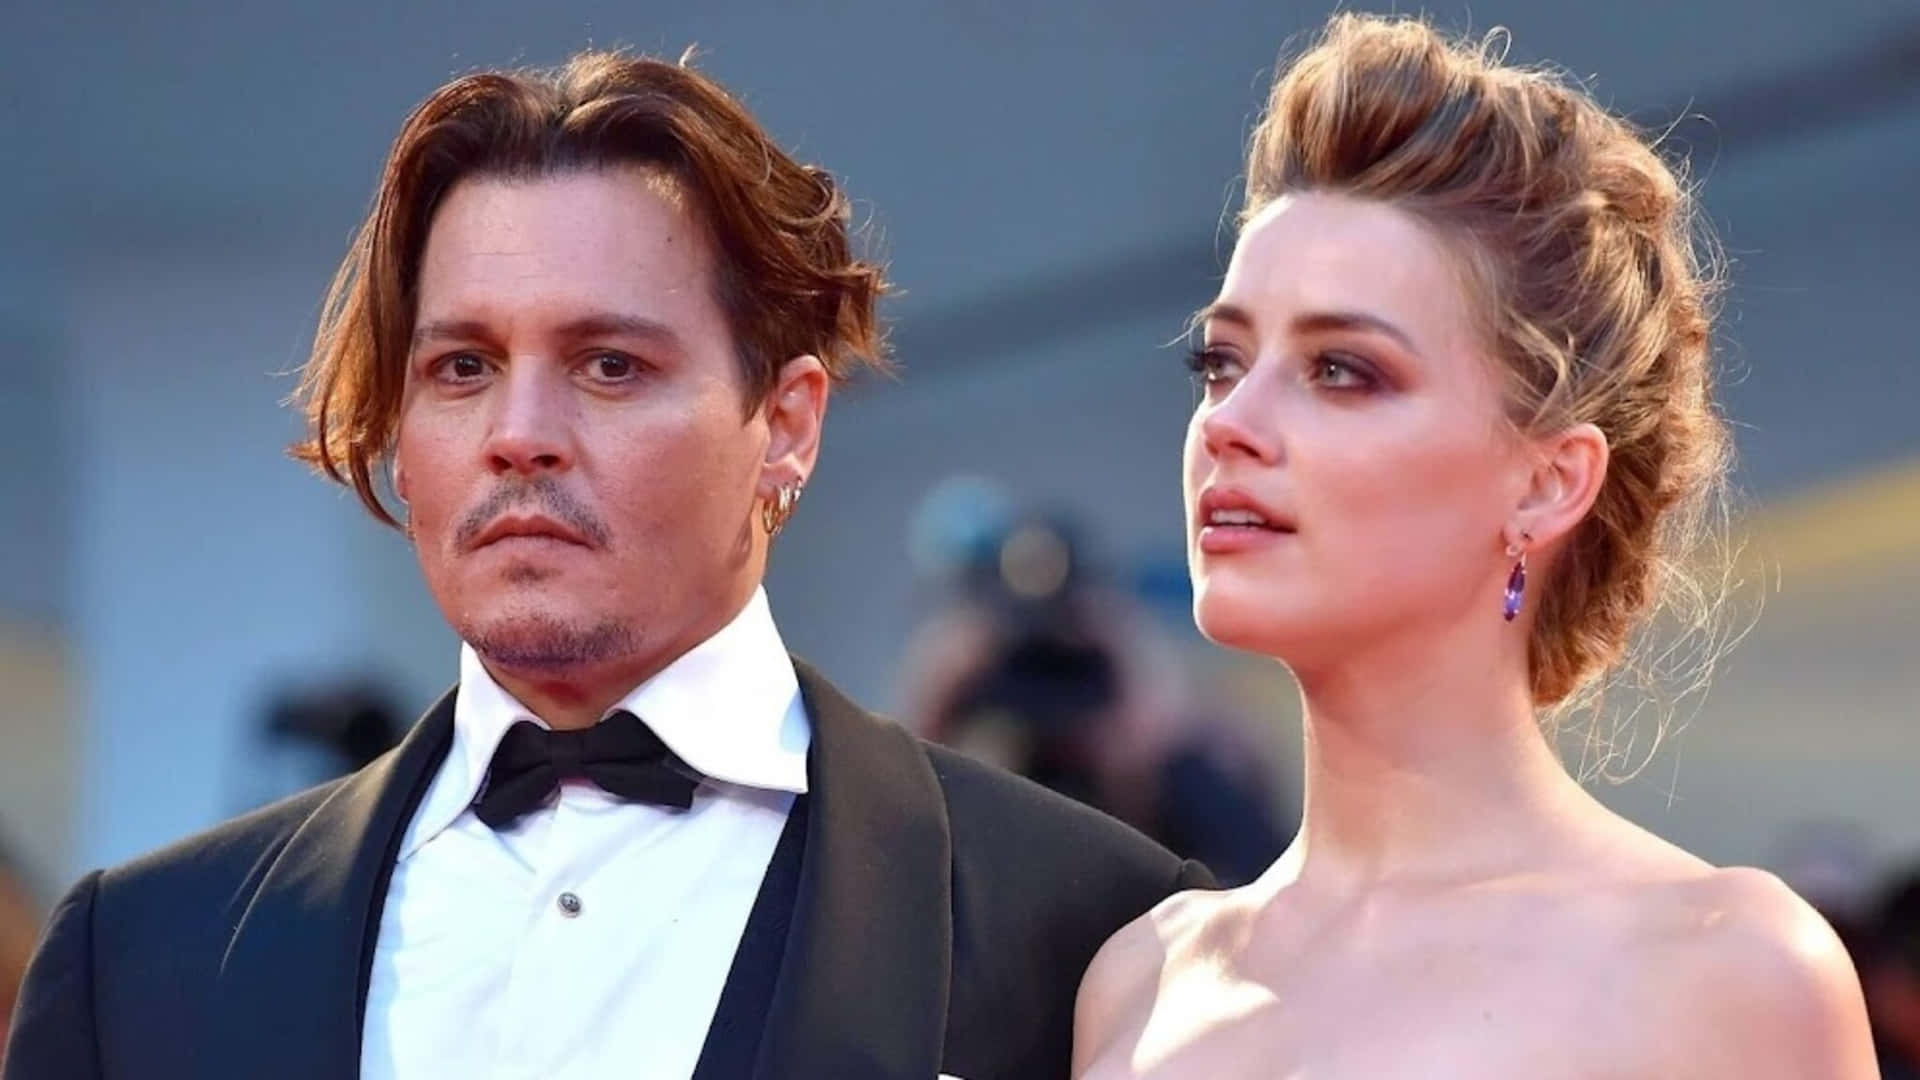 "A Love Story Cut Too Short: Johnny Depp and Amber Heard"